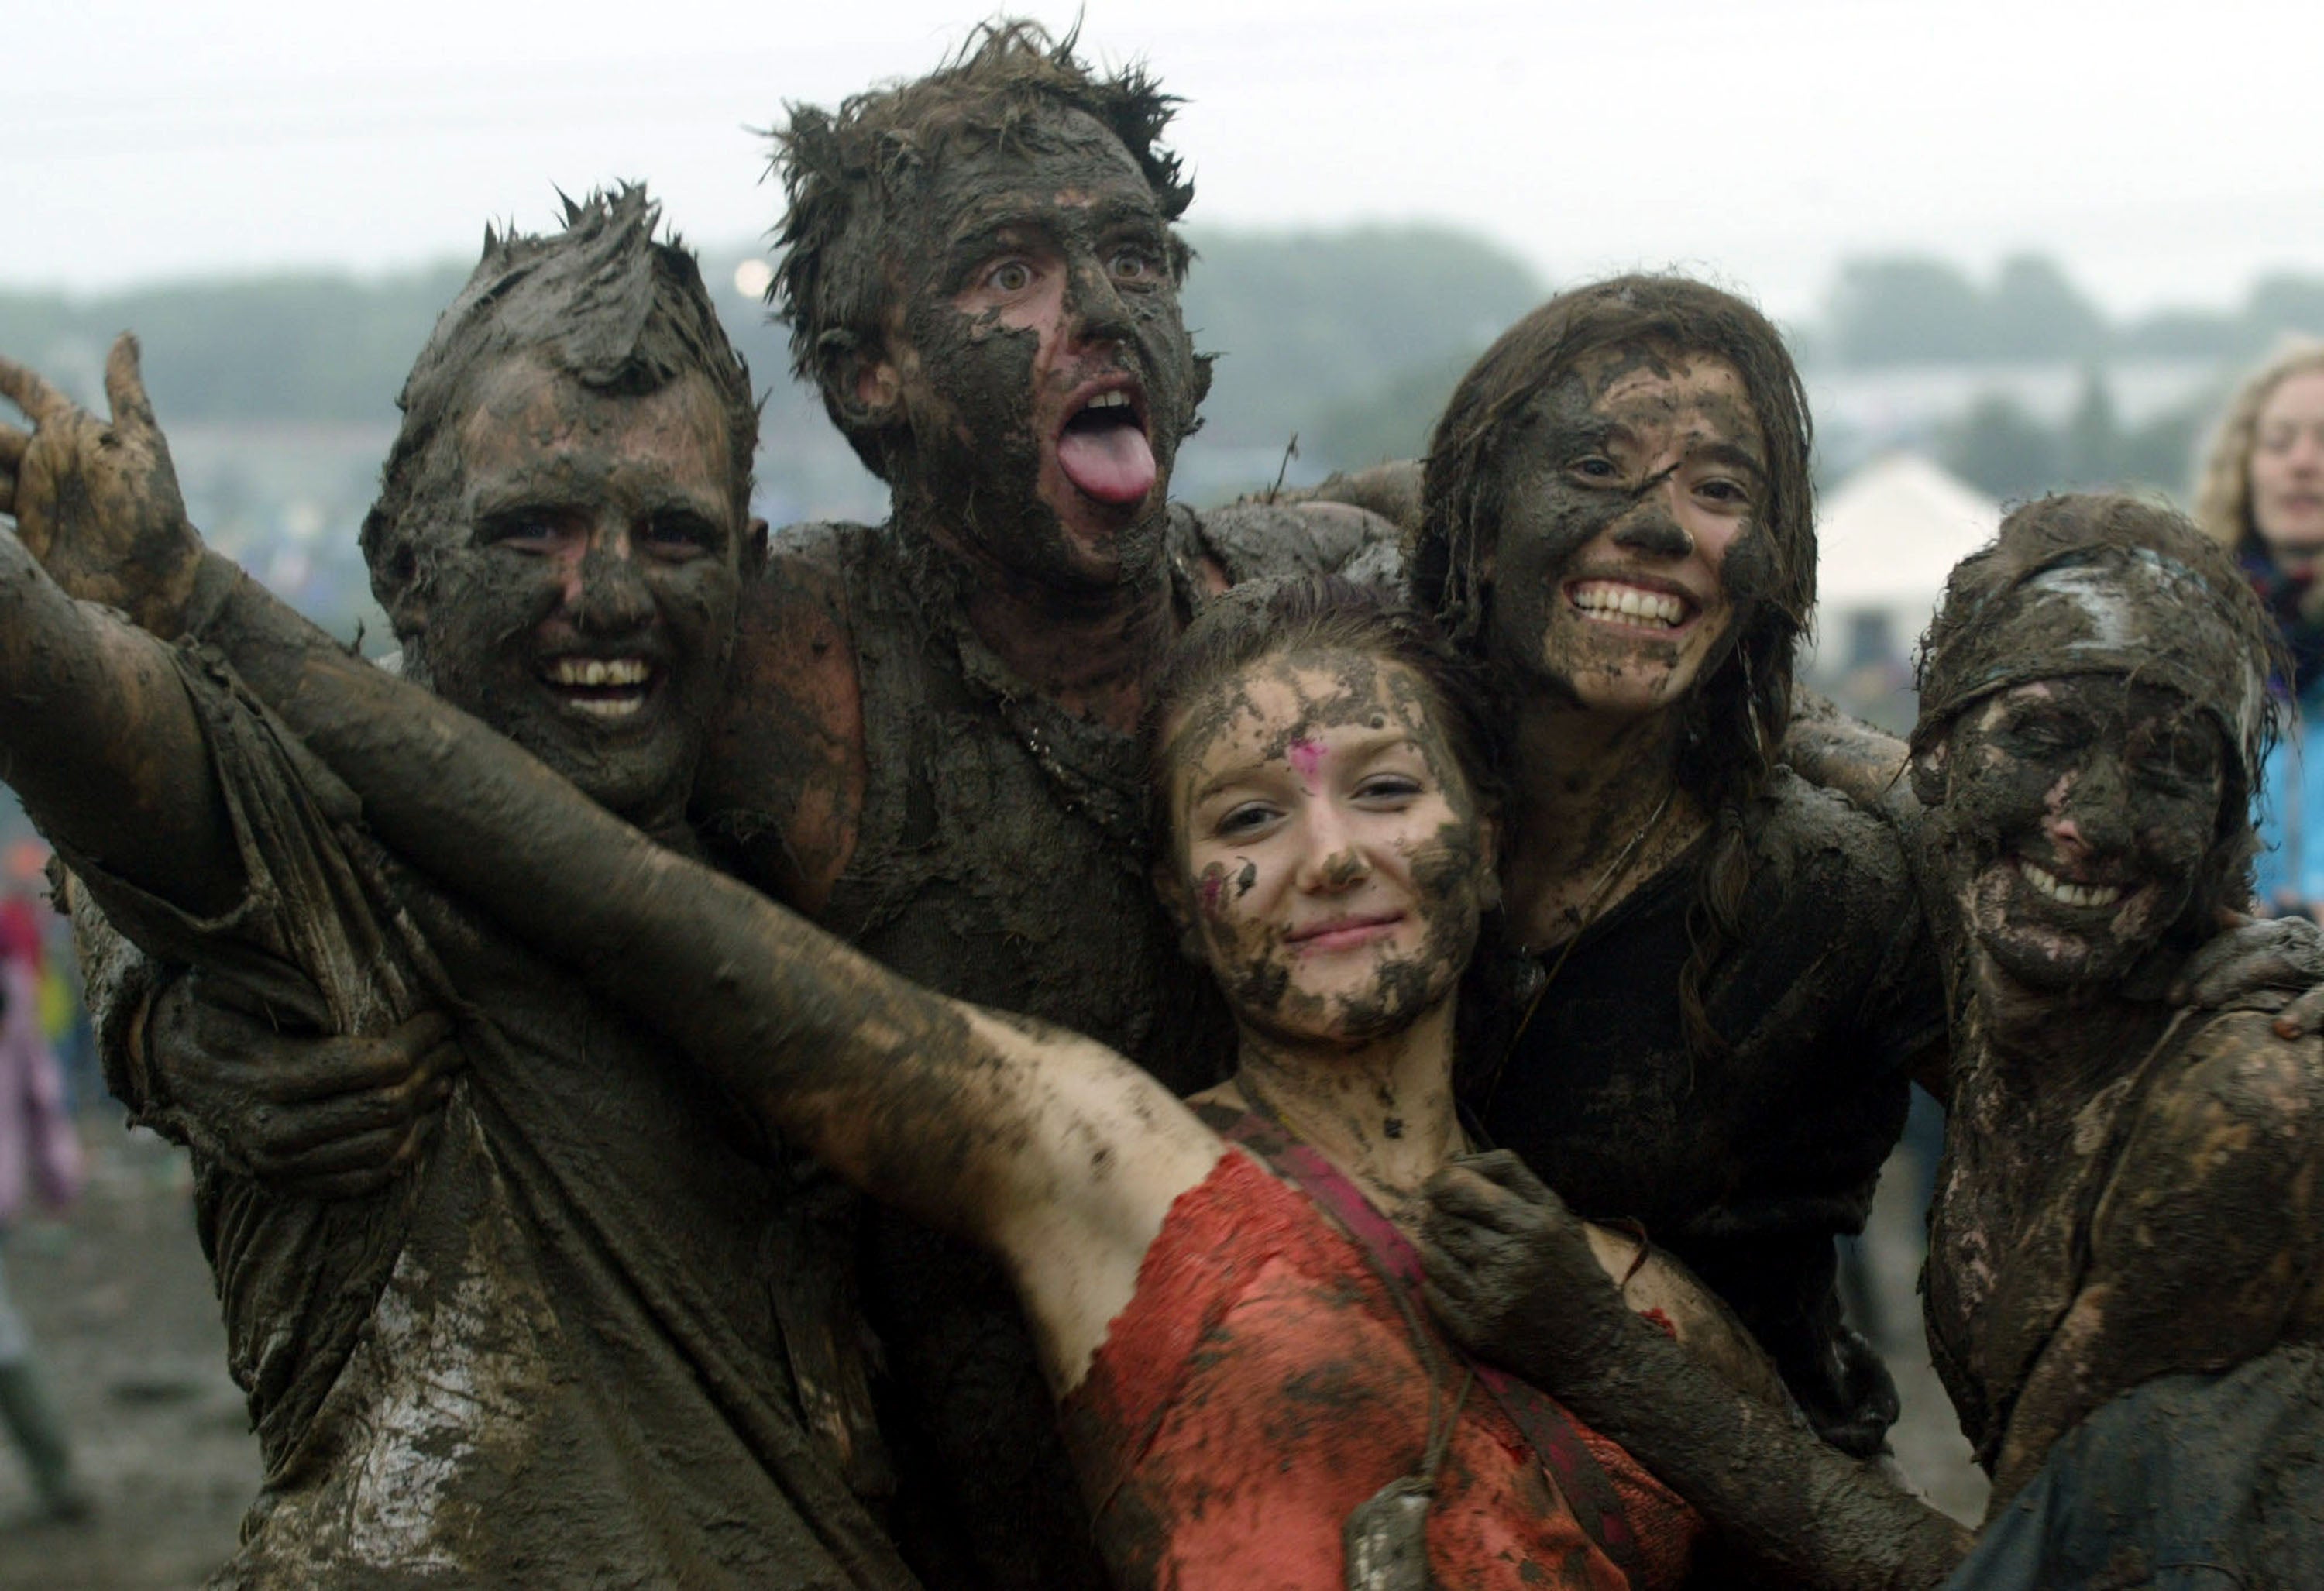 Festival-goers dance in the mud in front of the Pyramid stage in 2004